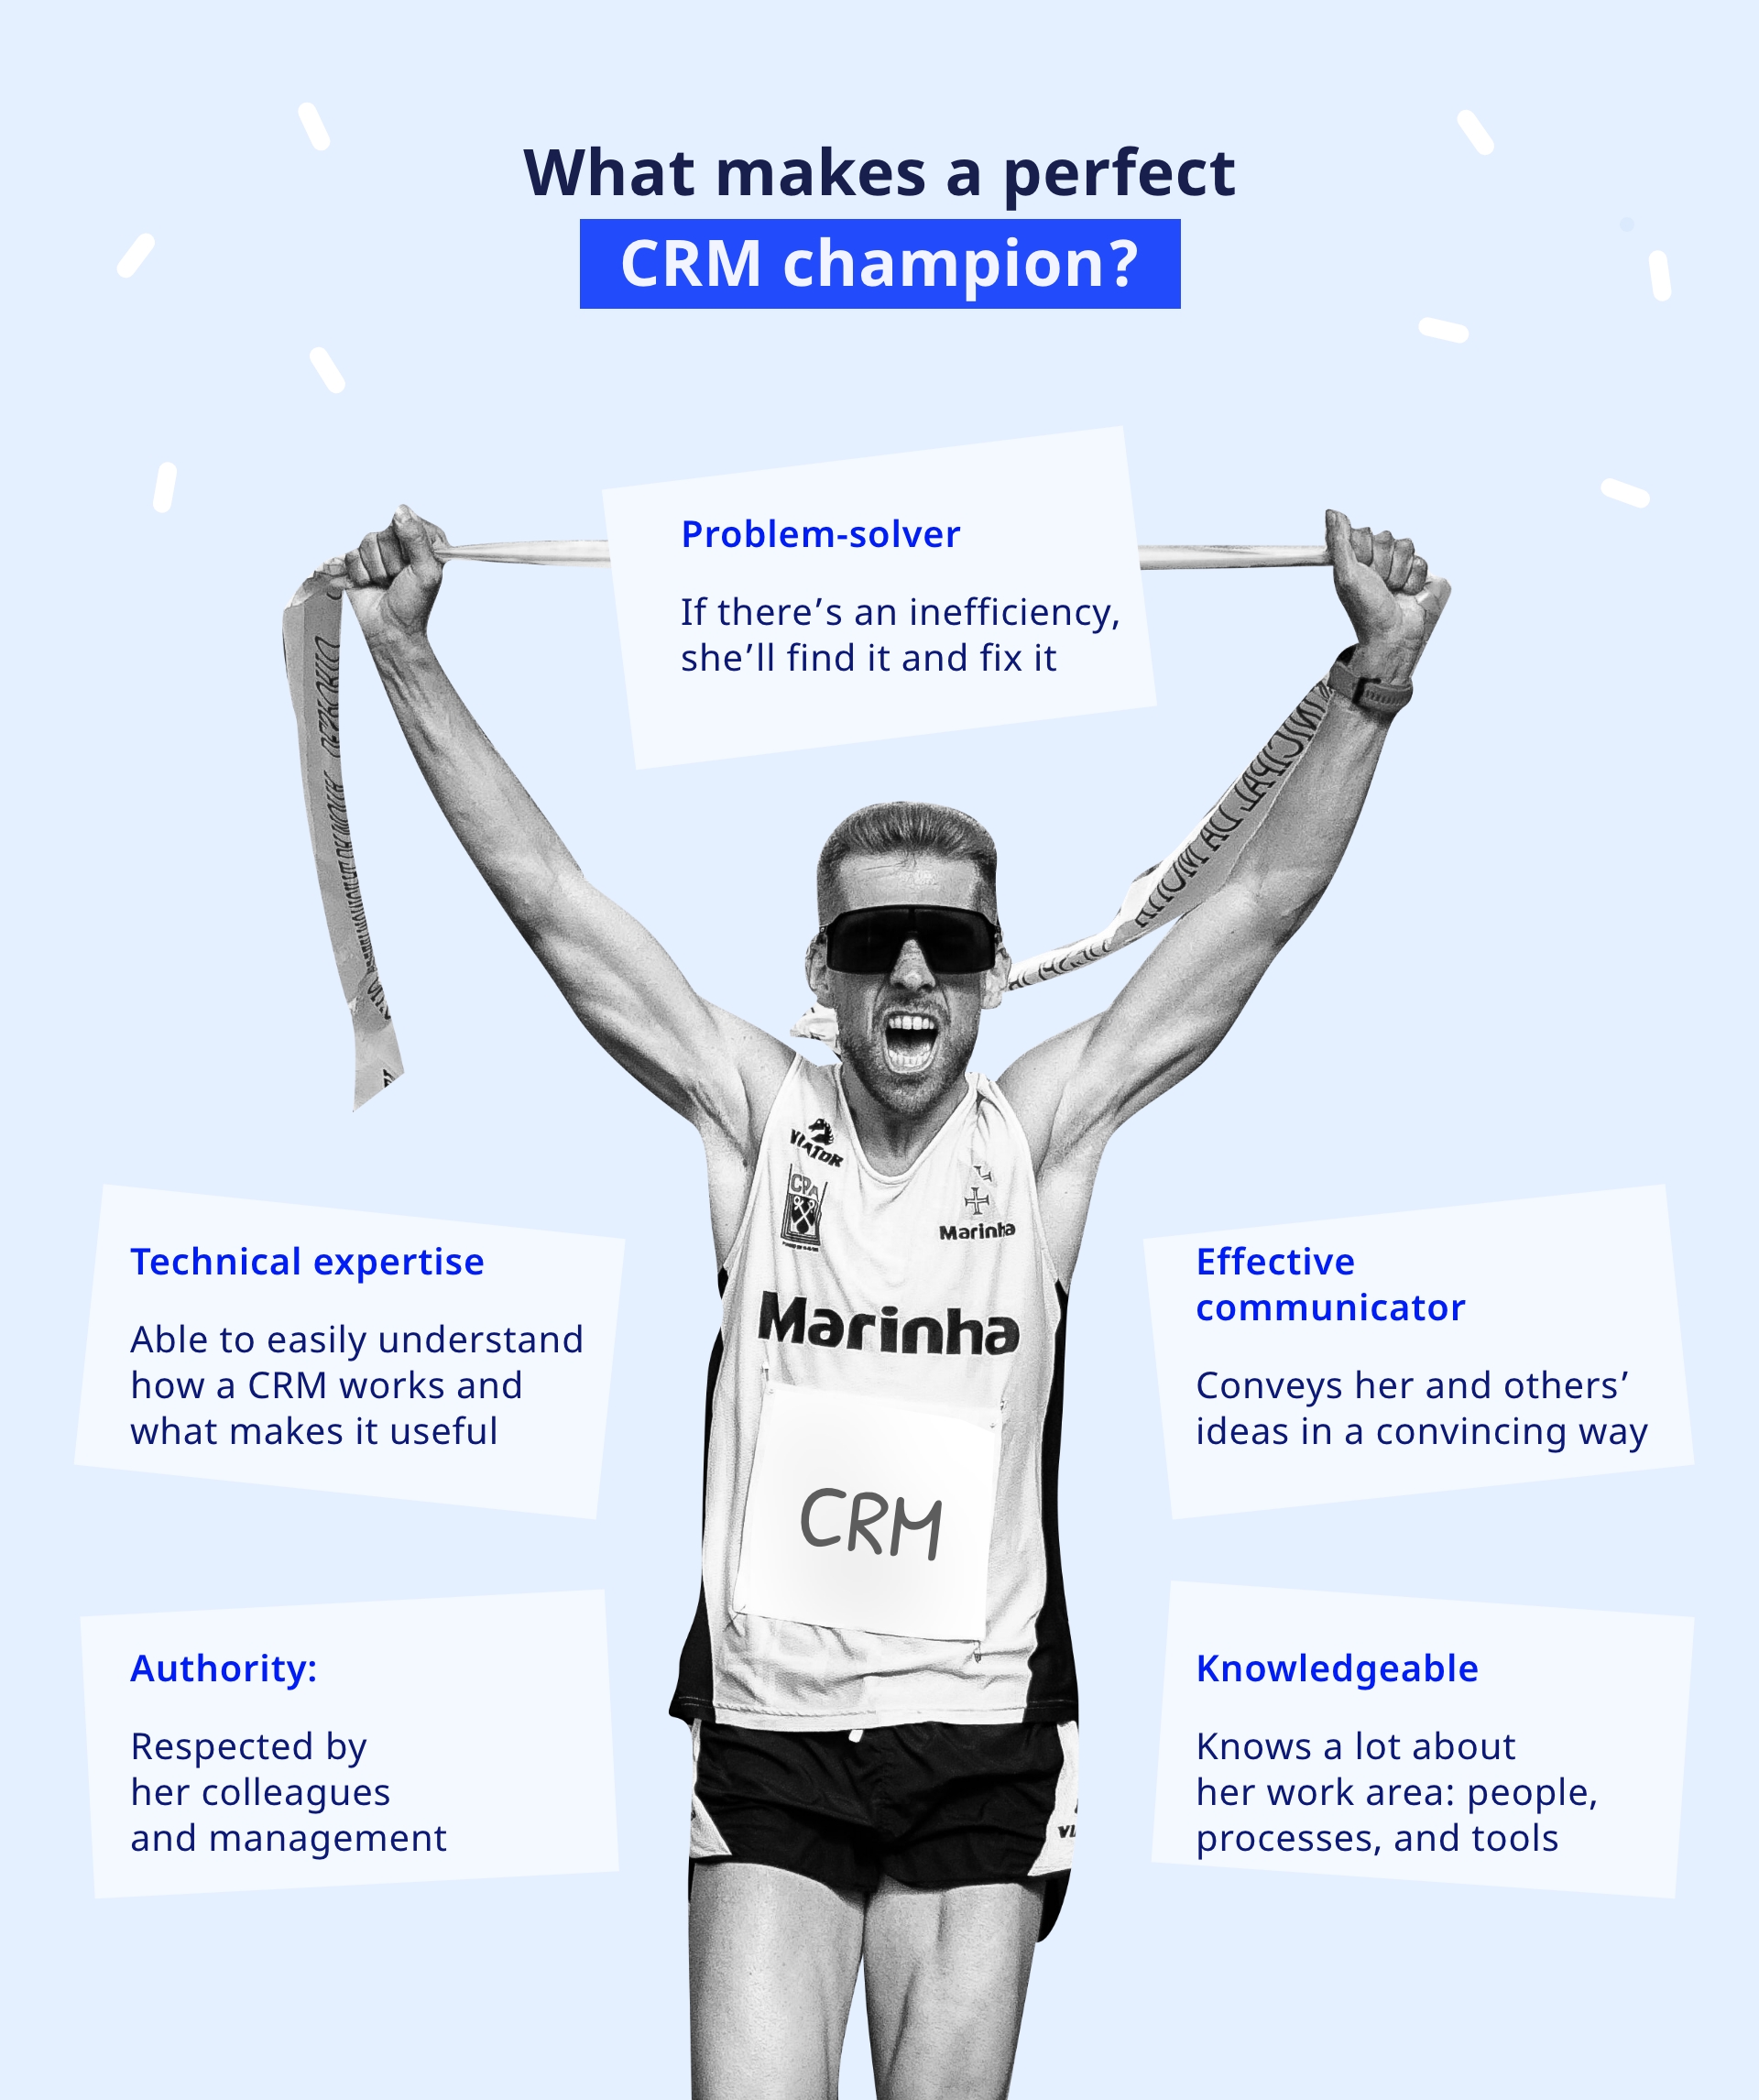 What makes a perfect CRM champion